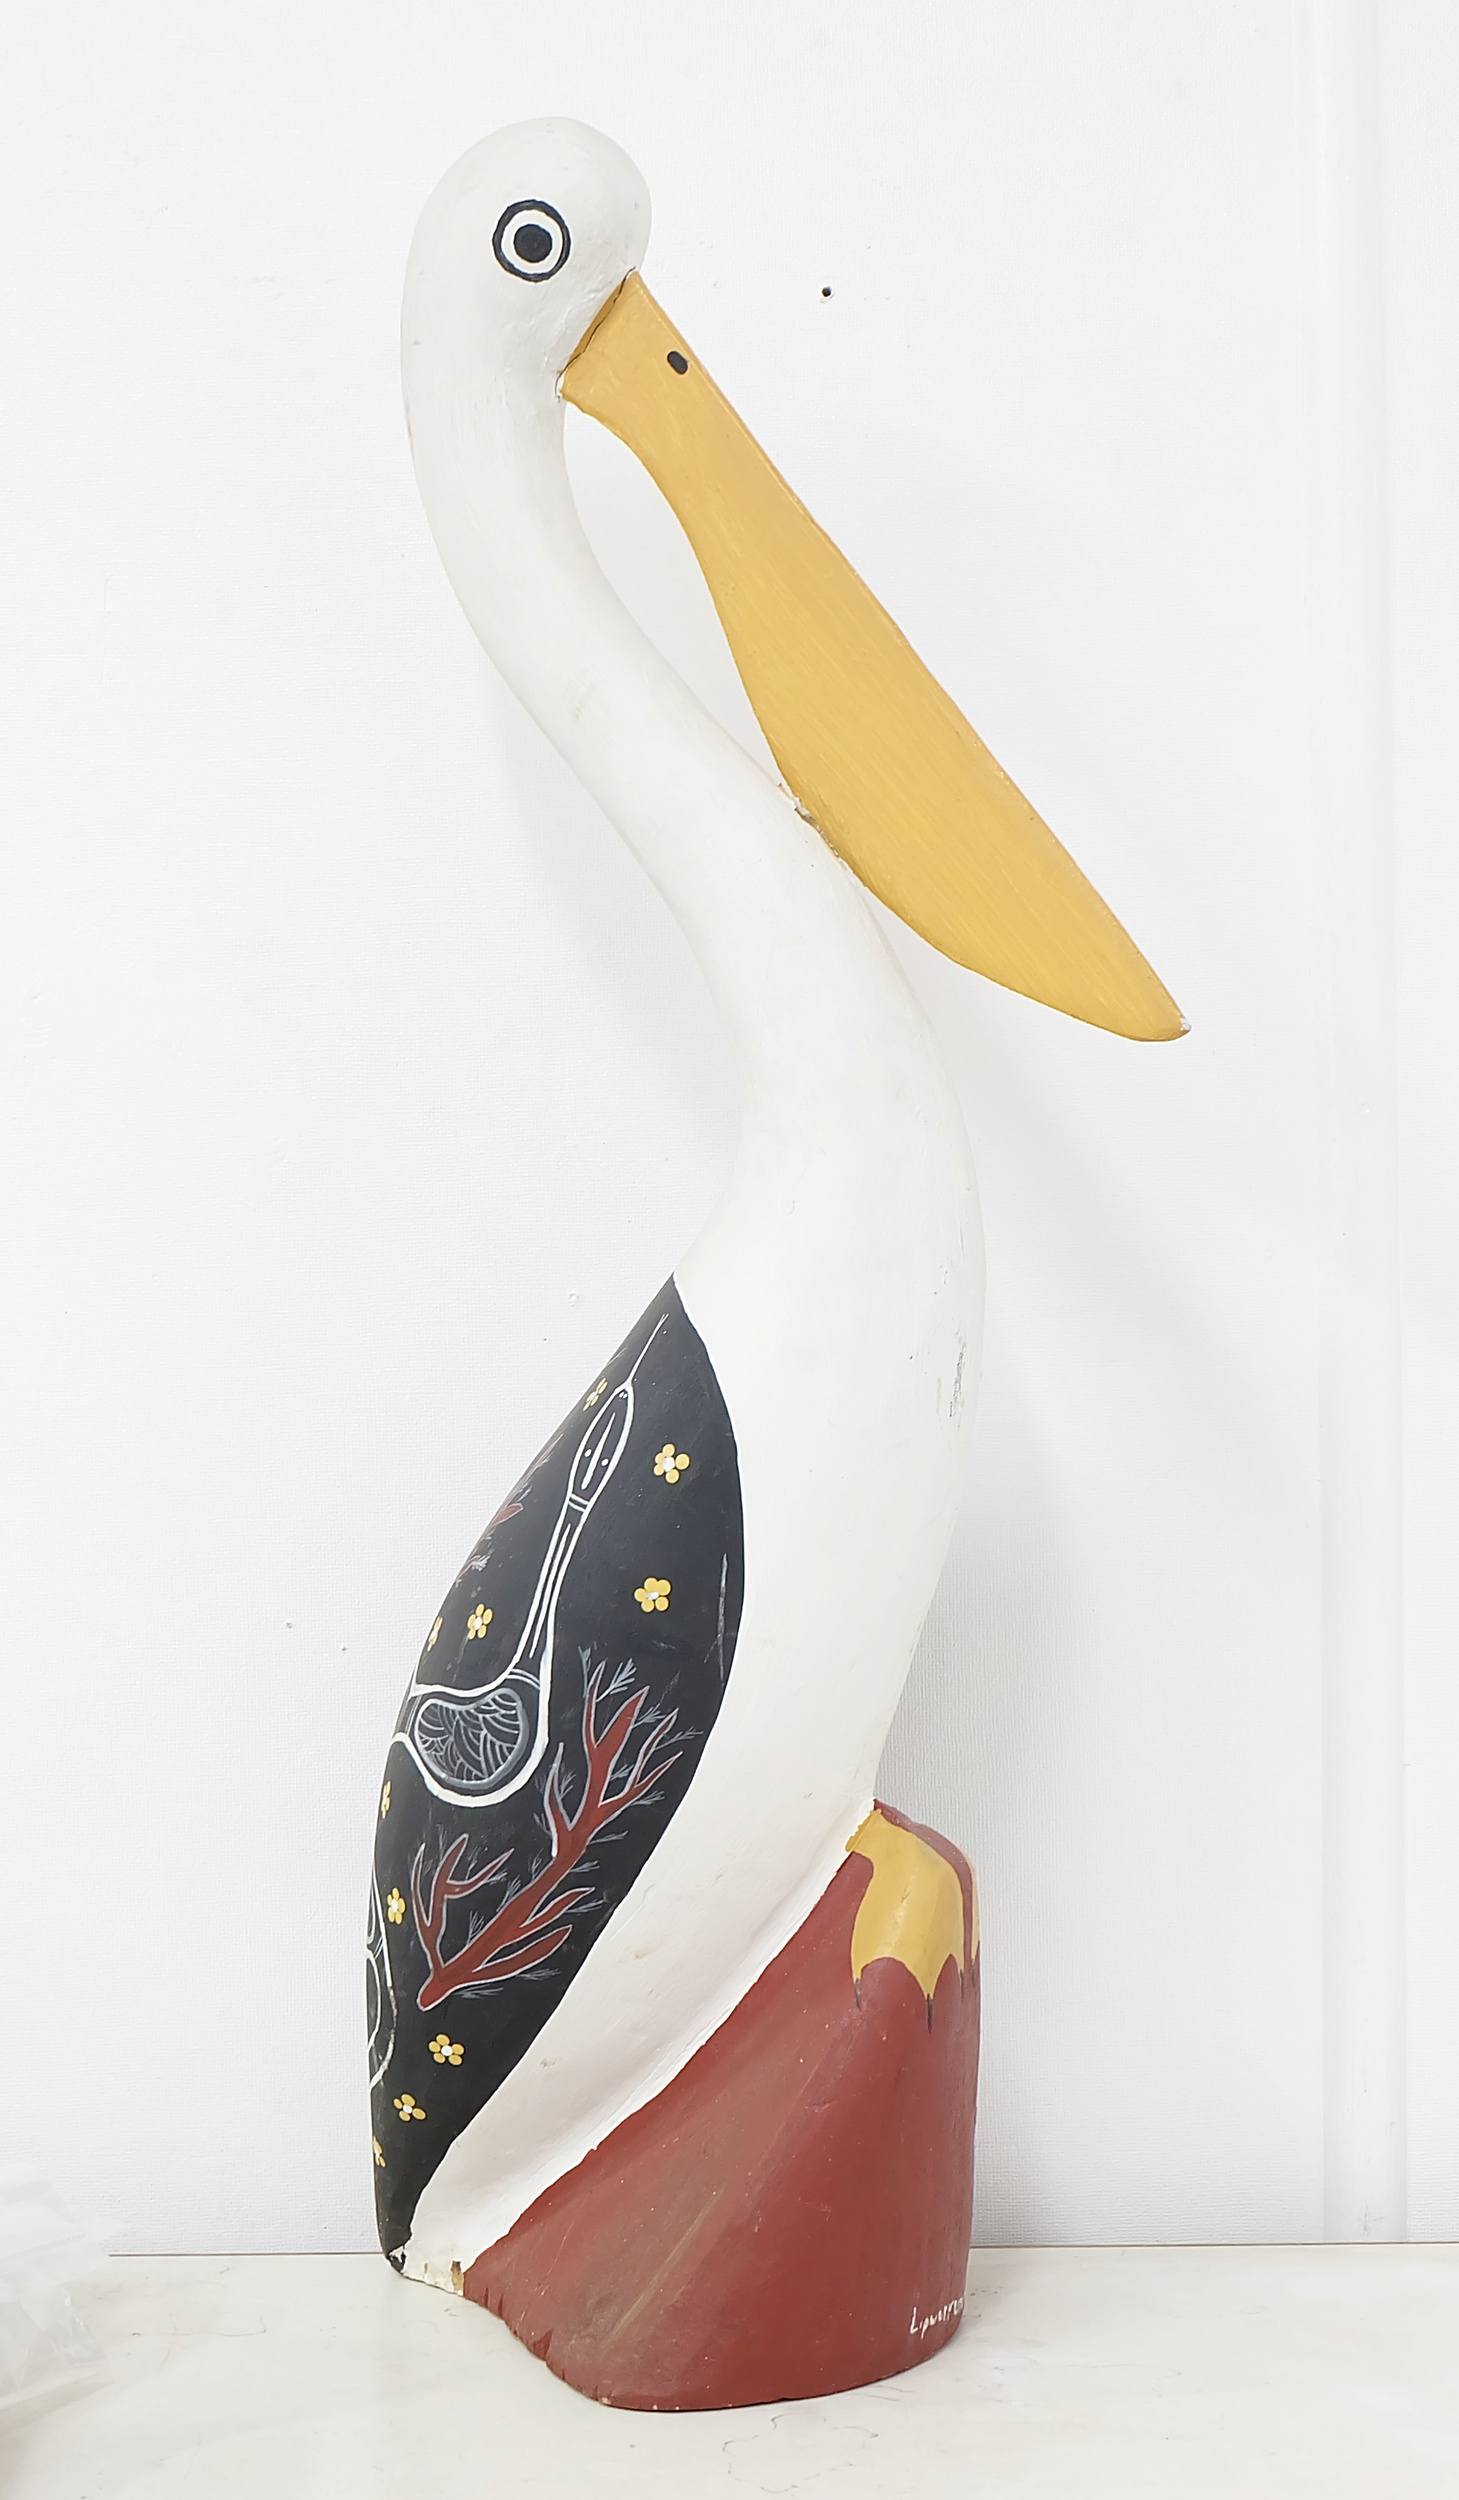 'Lipwurrunga Carved and Hand Painted Pelican Statue'